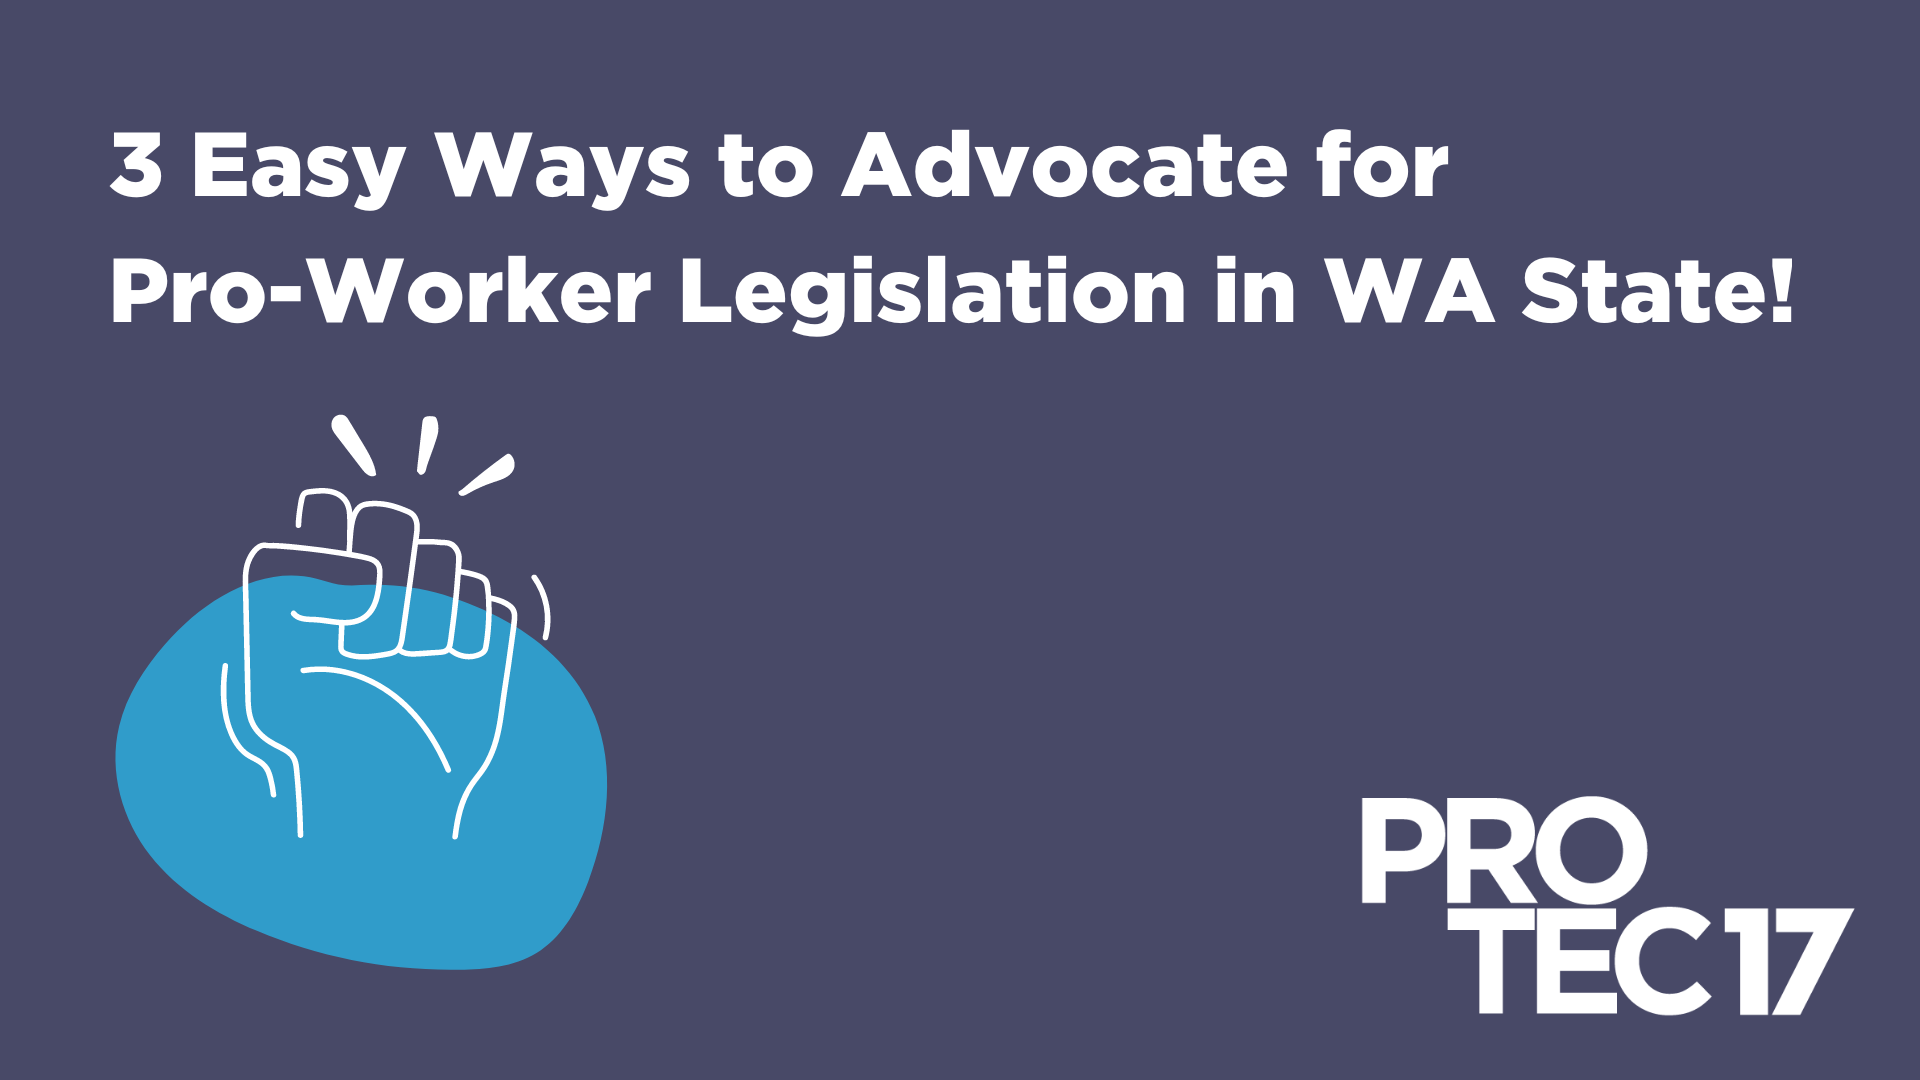 Image that reads, "3 Easy Ways to Advocate for Pro-Worker Legislation in WA State!" There is a simple illustration of a solidarity fist in the air and the PROTEC17 logo.